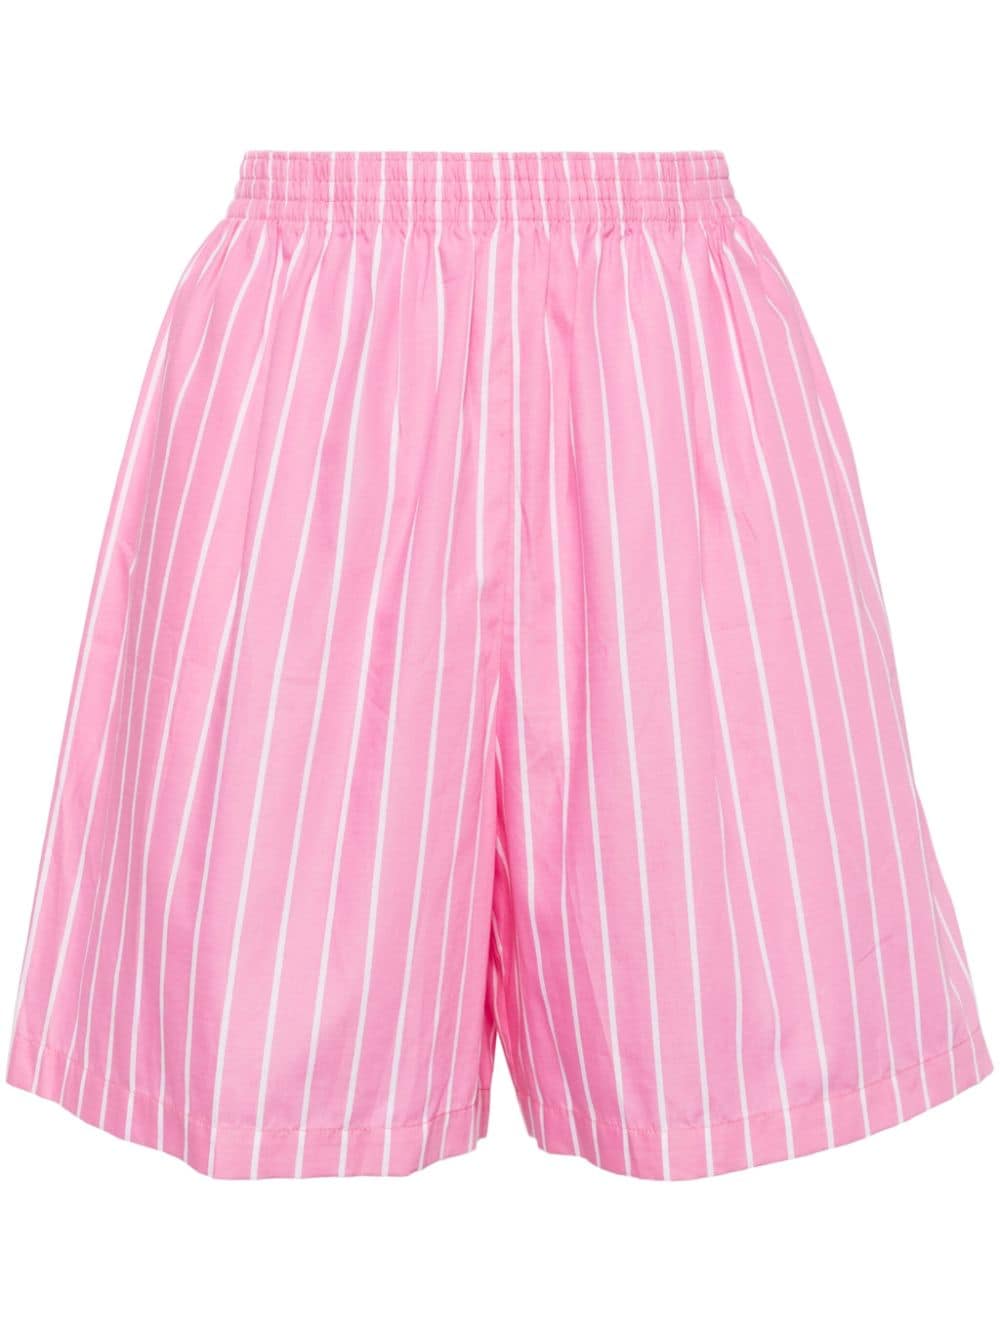 CHANEL Pre-Owned 1990-2000s striped cotton shorts - Pink von CHANEL Pre-Owned